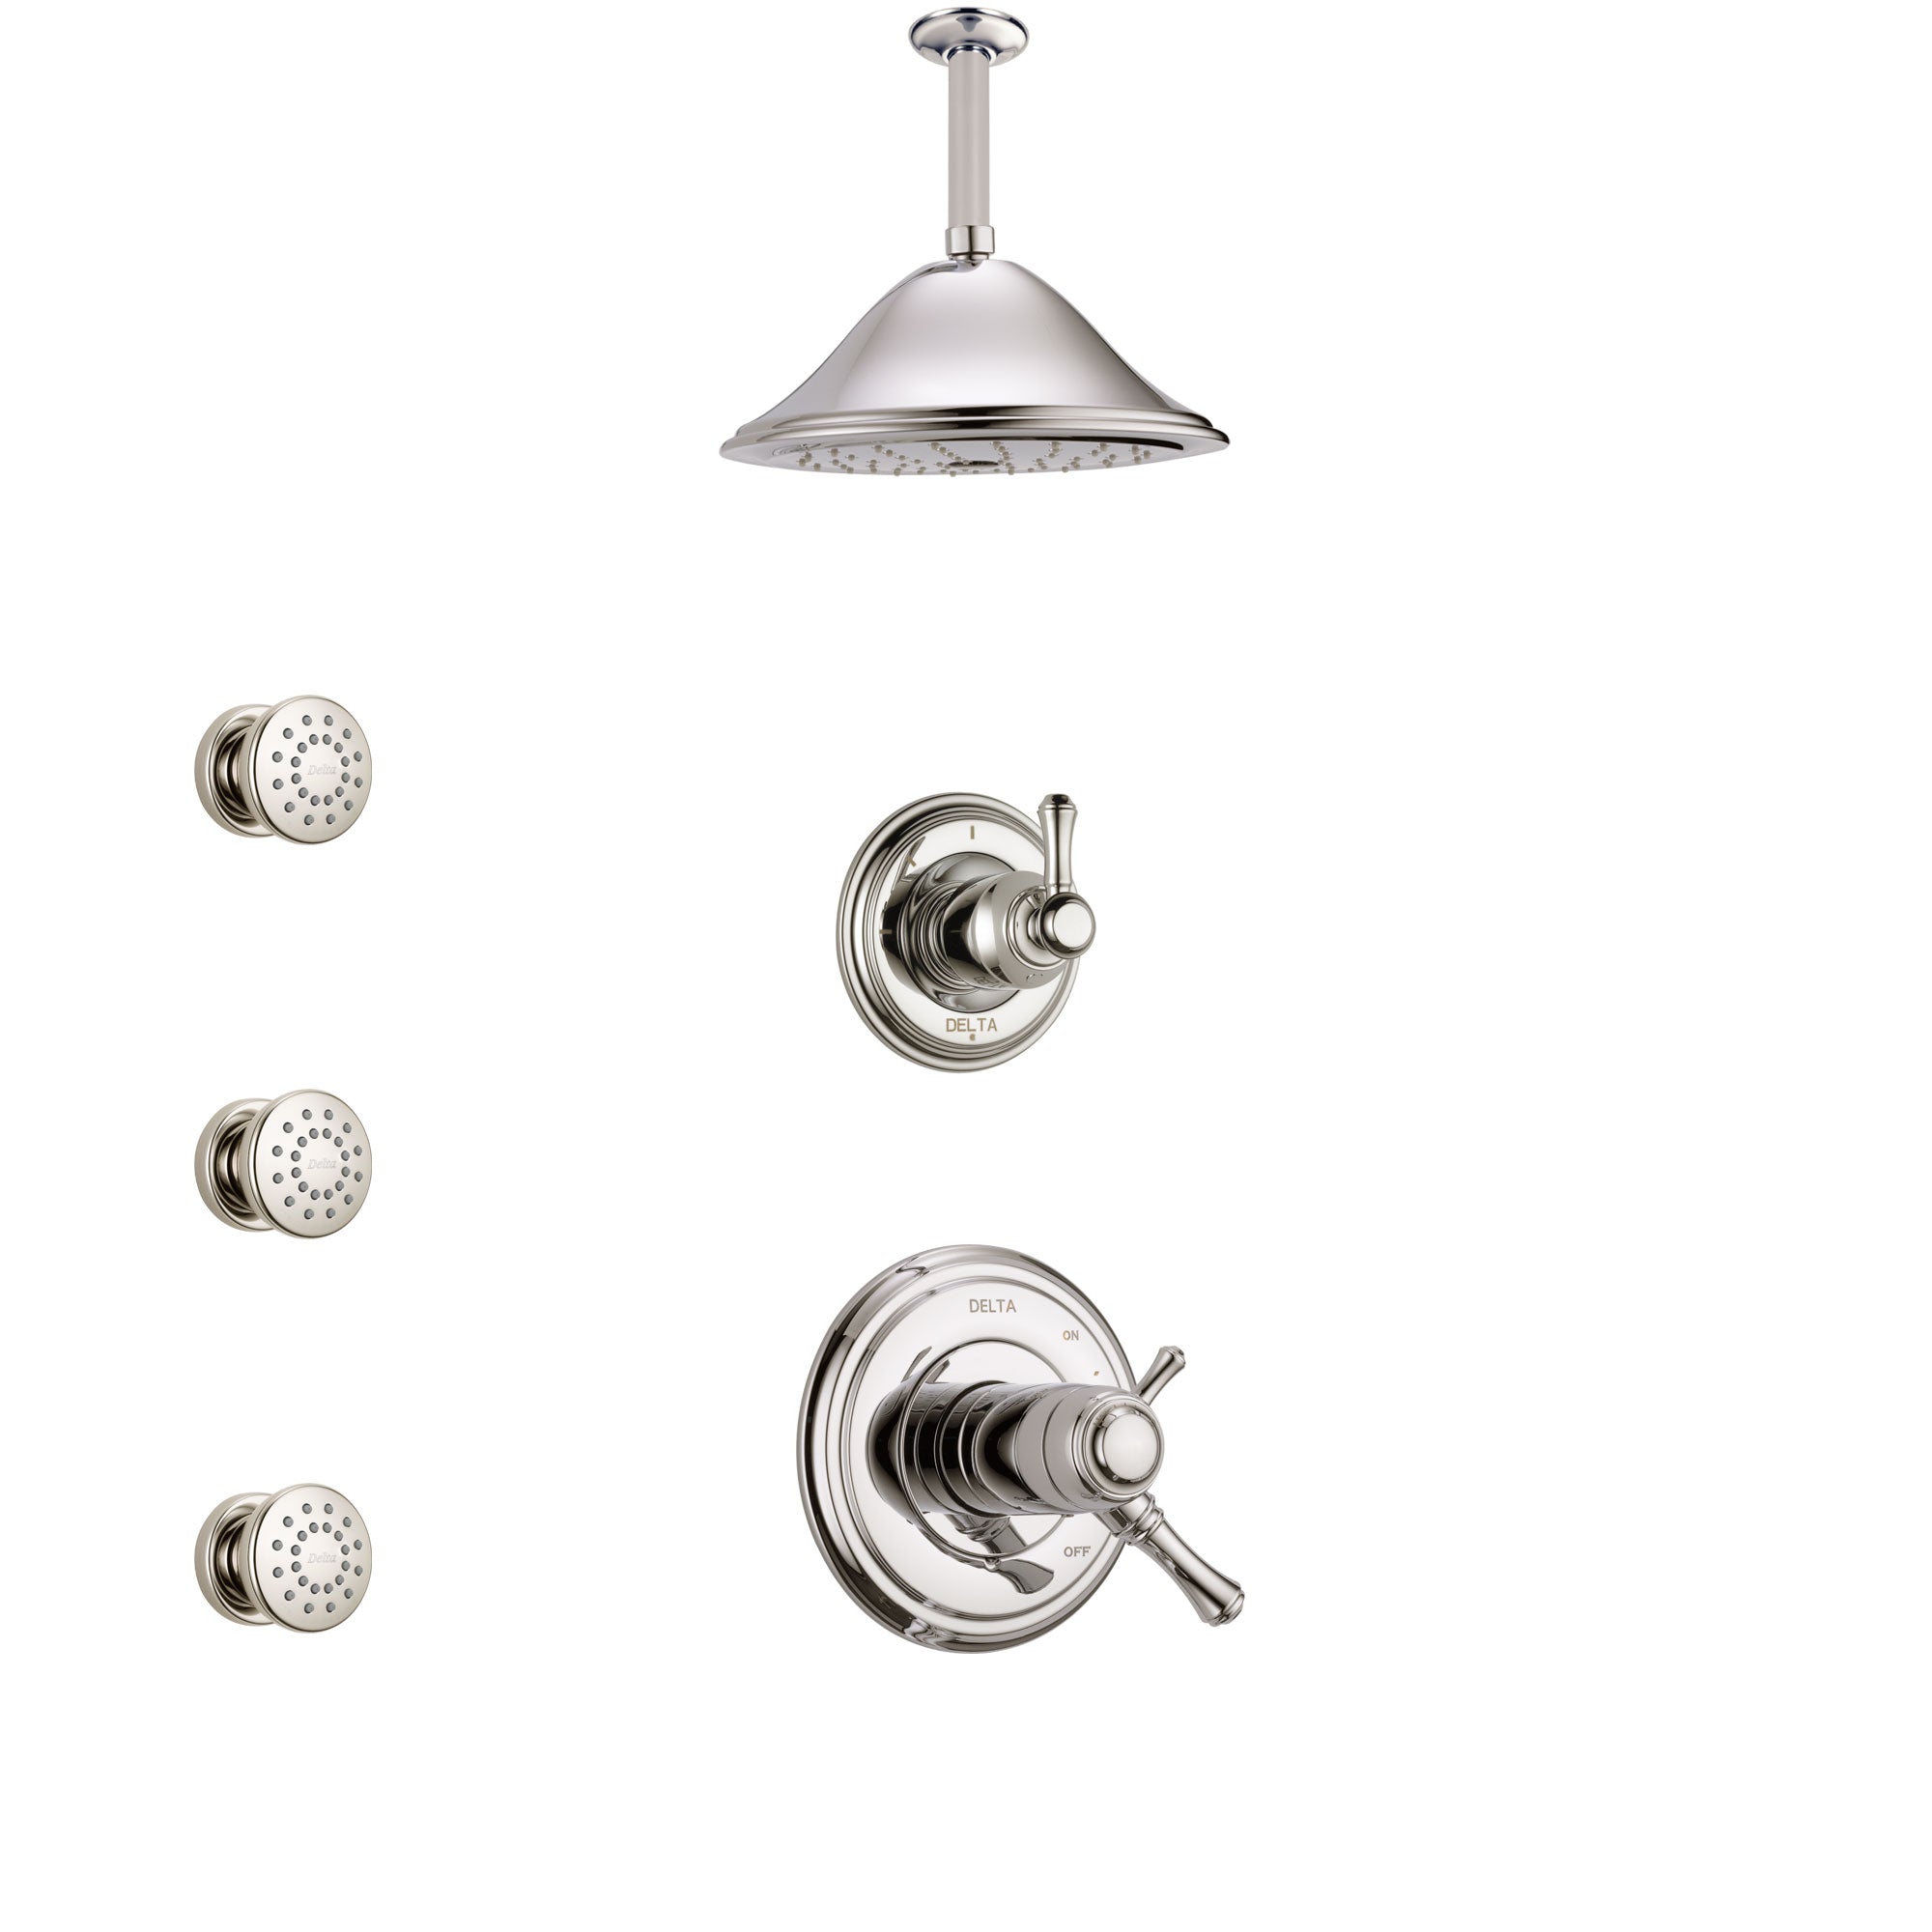 Delta Cassidy Polished Nickel Shower System with Dual Thermostatic Control Handle, Diverter, Ceiling Mount Showerhead, and 3 Body Sprays SS17T972PN4